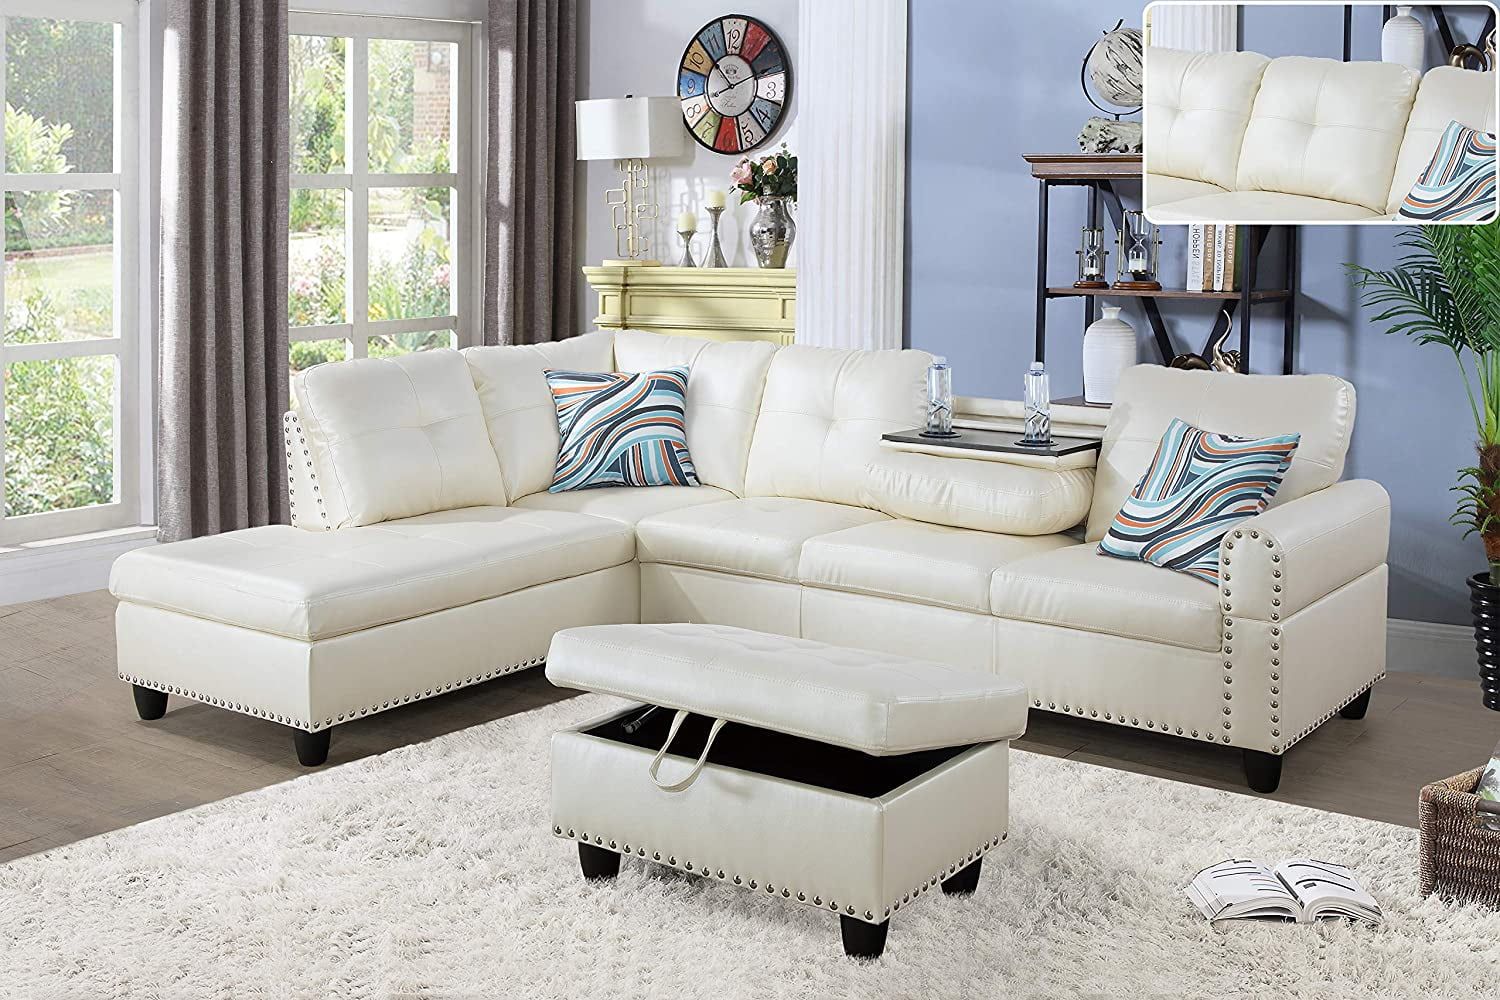 Ainehome Faux Leather Sectional Sofa, Living Room Set With Drop Down Table  & Cup Holder – White – Walmart Regarding Faux Leather Sectional Sofa Sets (Photo 15 of 15)